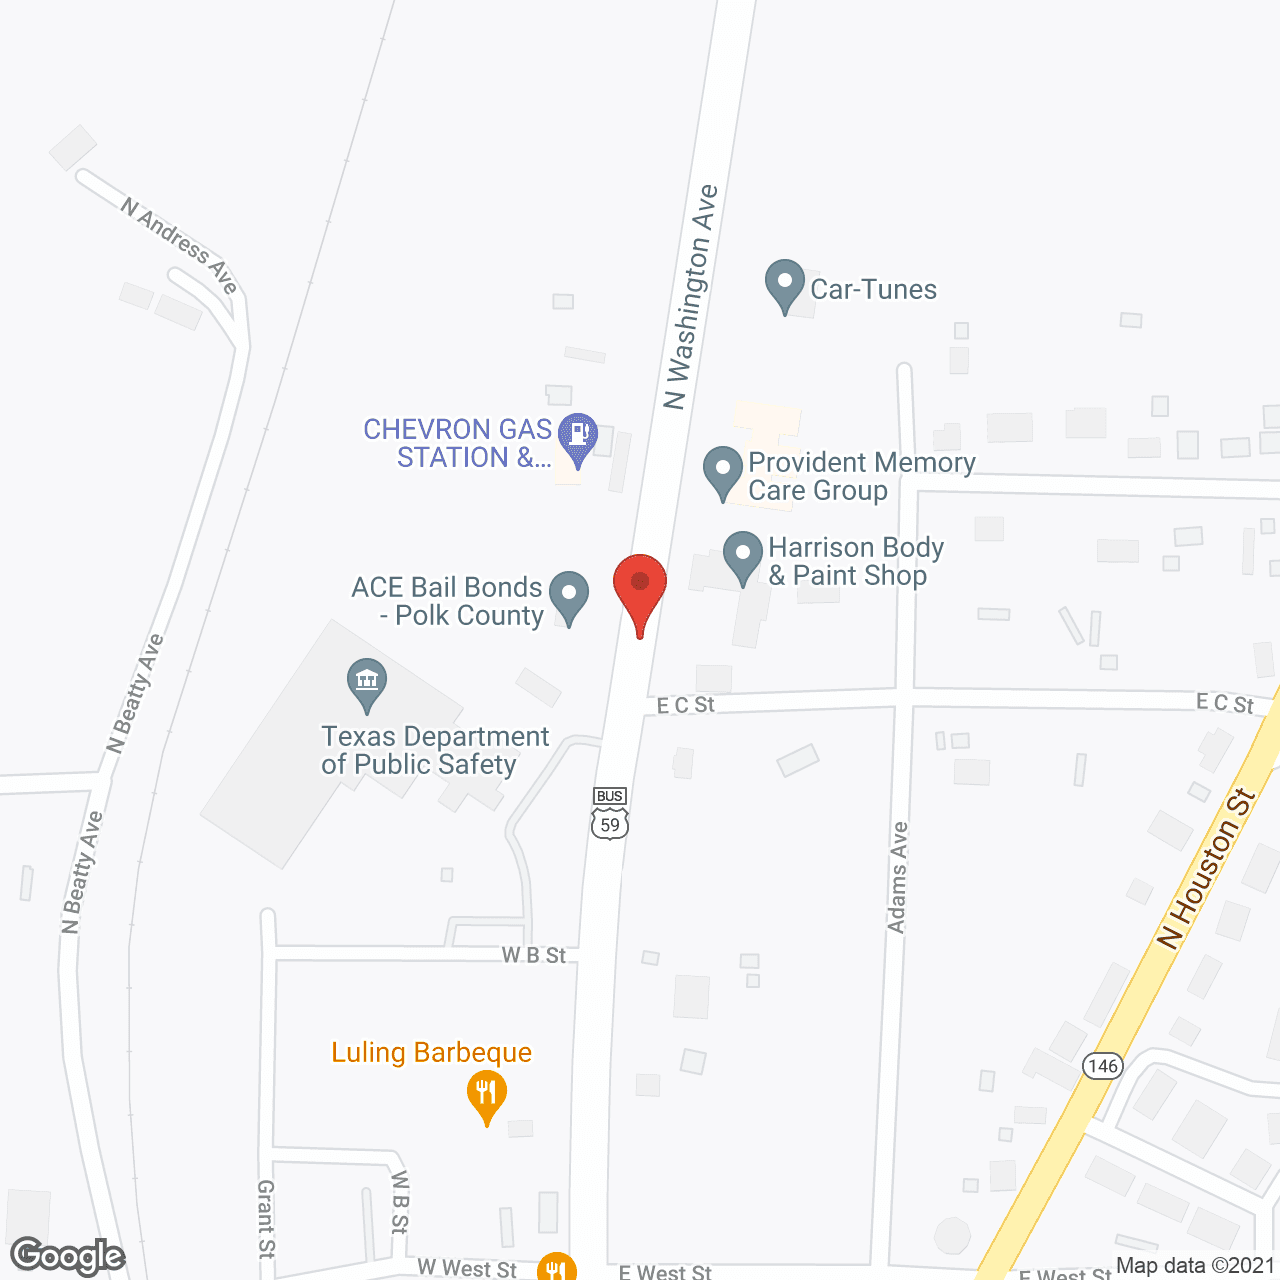 Provident Memory Care in google map